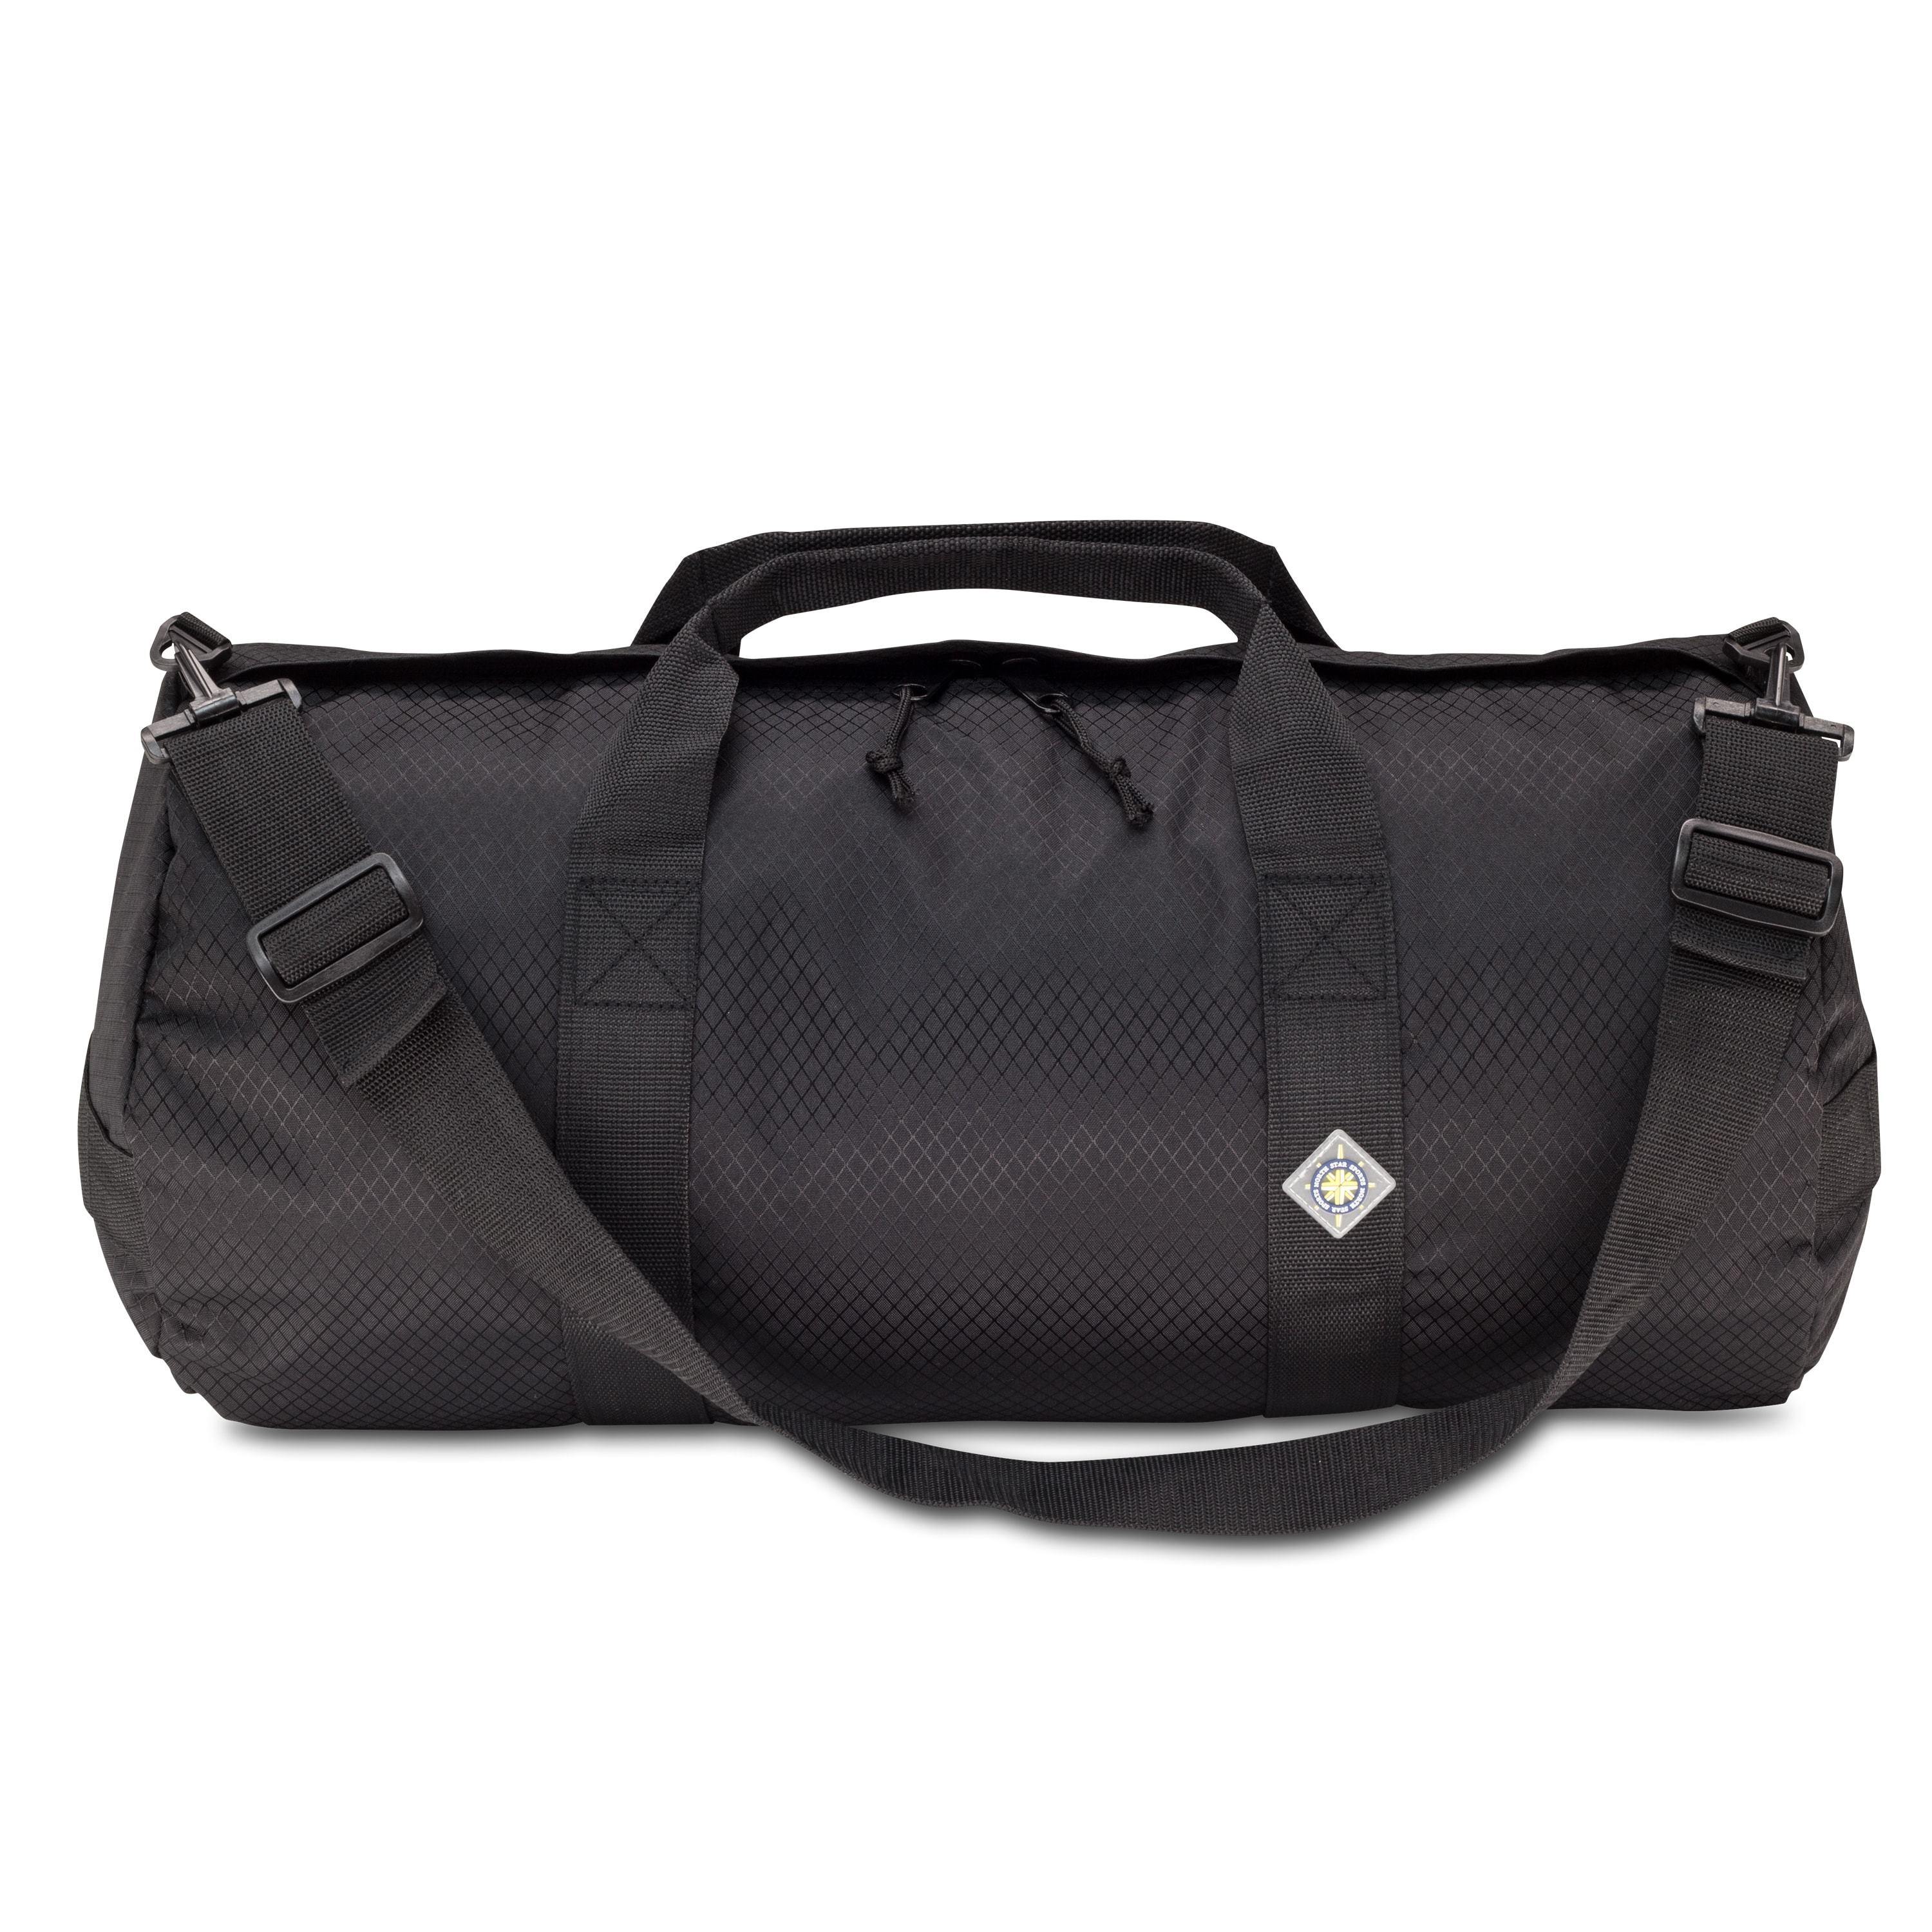 Studio photo the Midnight Black SD1224DLX Standard Duffle by Northstar Bags. 44 liter duffel with diamond ripstop fabric, thick webbing straps, and a large format metal zipper. Guaranteed for life.